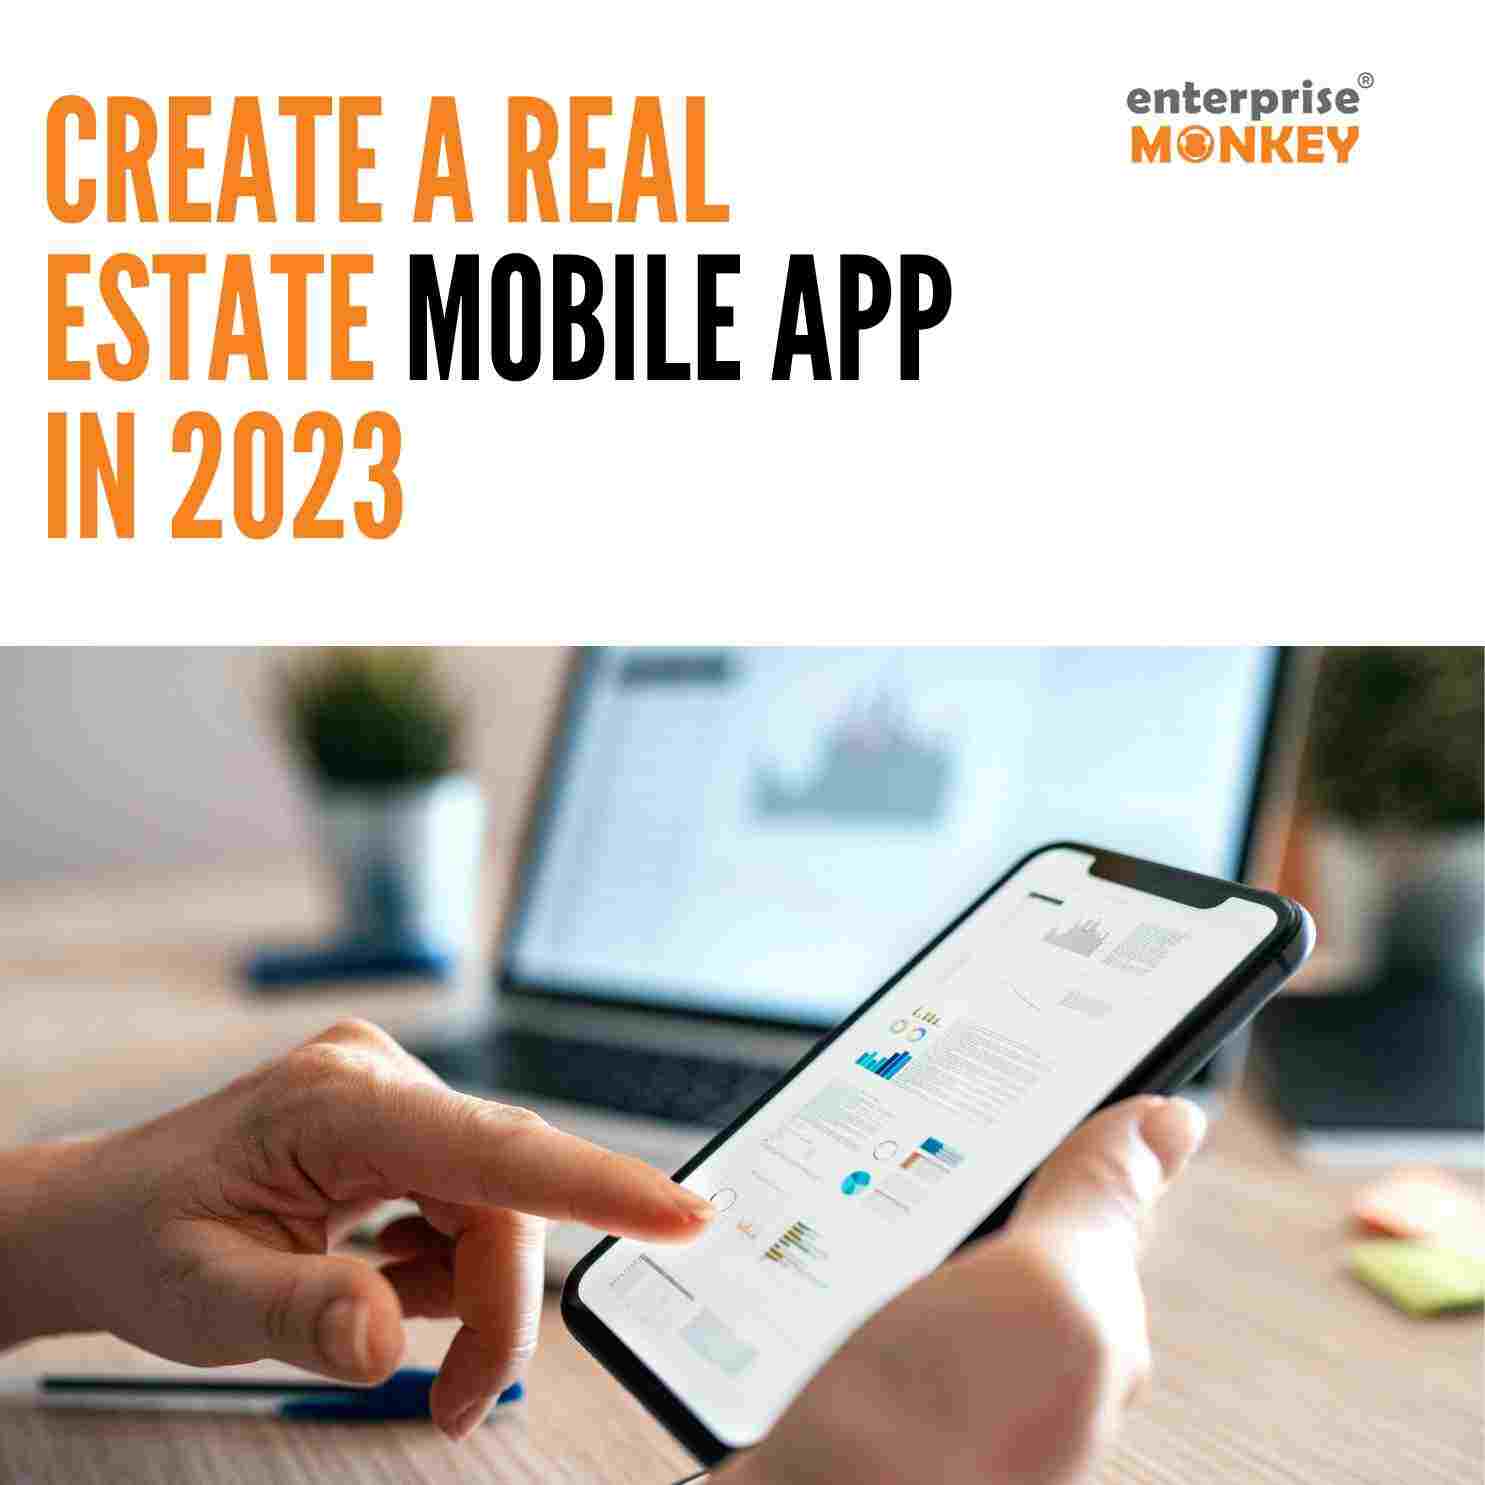 Create a Real Estate Mobile App in 2023